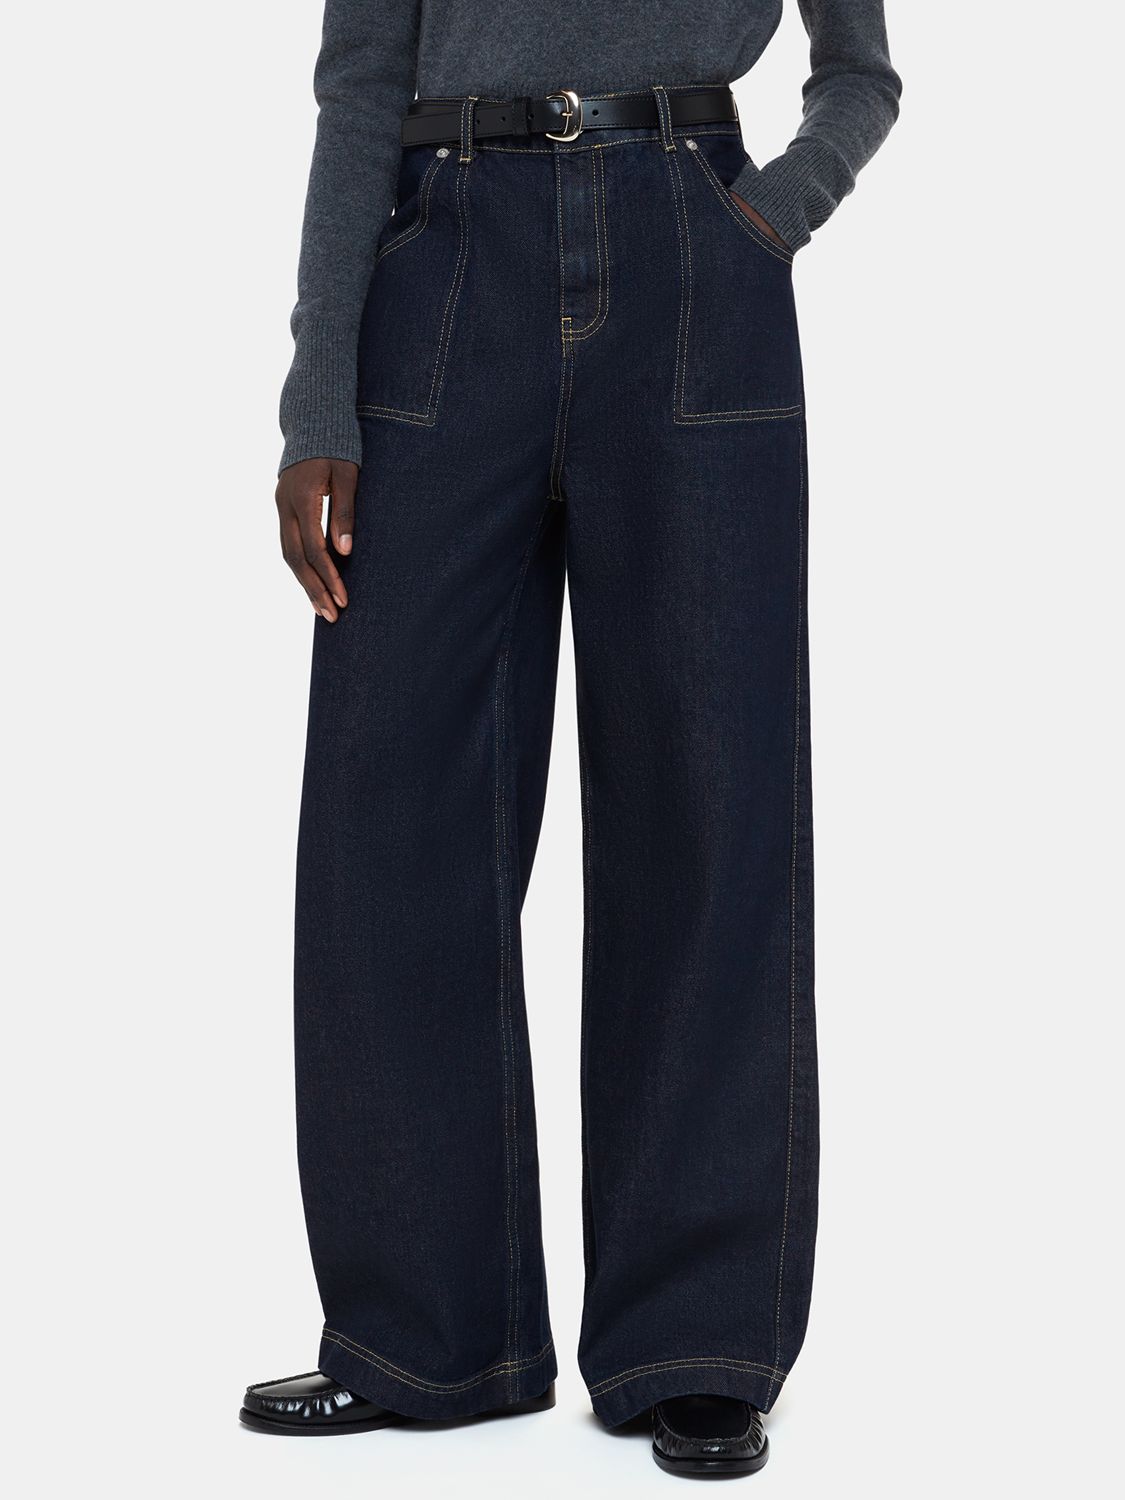 Buy Whistles Marie Elasticated Waist Jeans, Washed Black Online at johnlewis.com